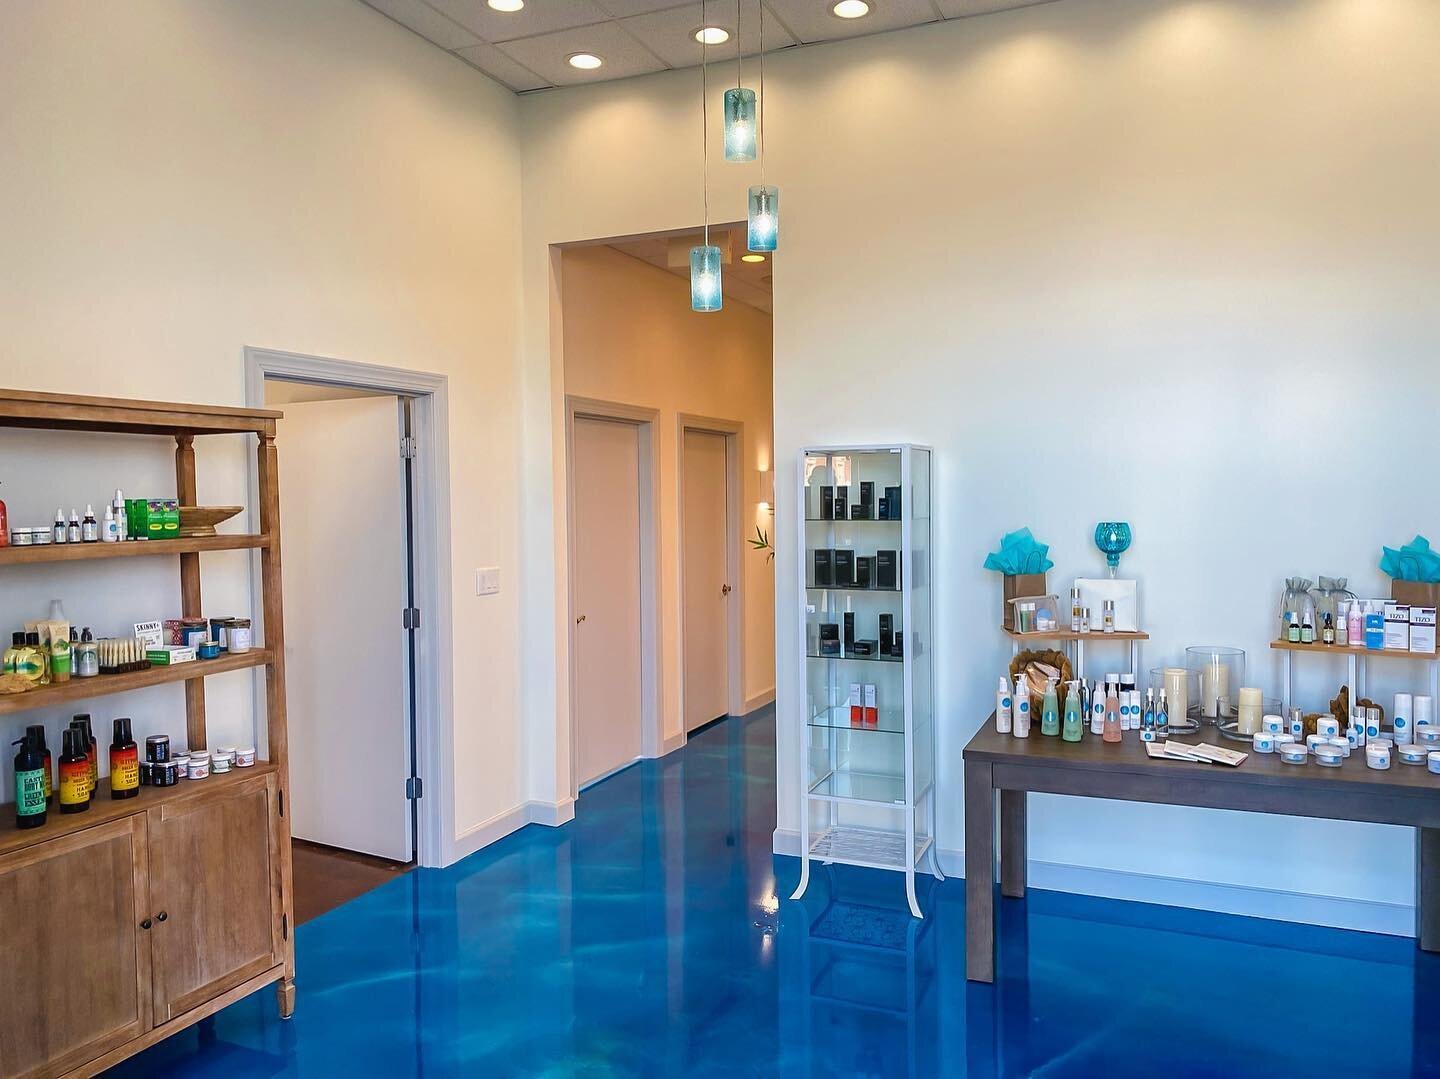 Come see Spa Blu at our new location to get summer ready! 

&bull; Waxes &bull; Makeup Counter
&bull; Facials
&bull; Oxygen infusion
&bull; Micro needling
&bull; Laser hair removal
&bull; Hydra facials
&bull; And massage coming soon!